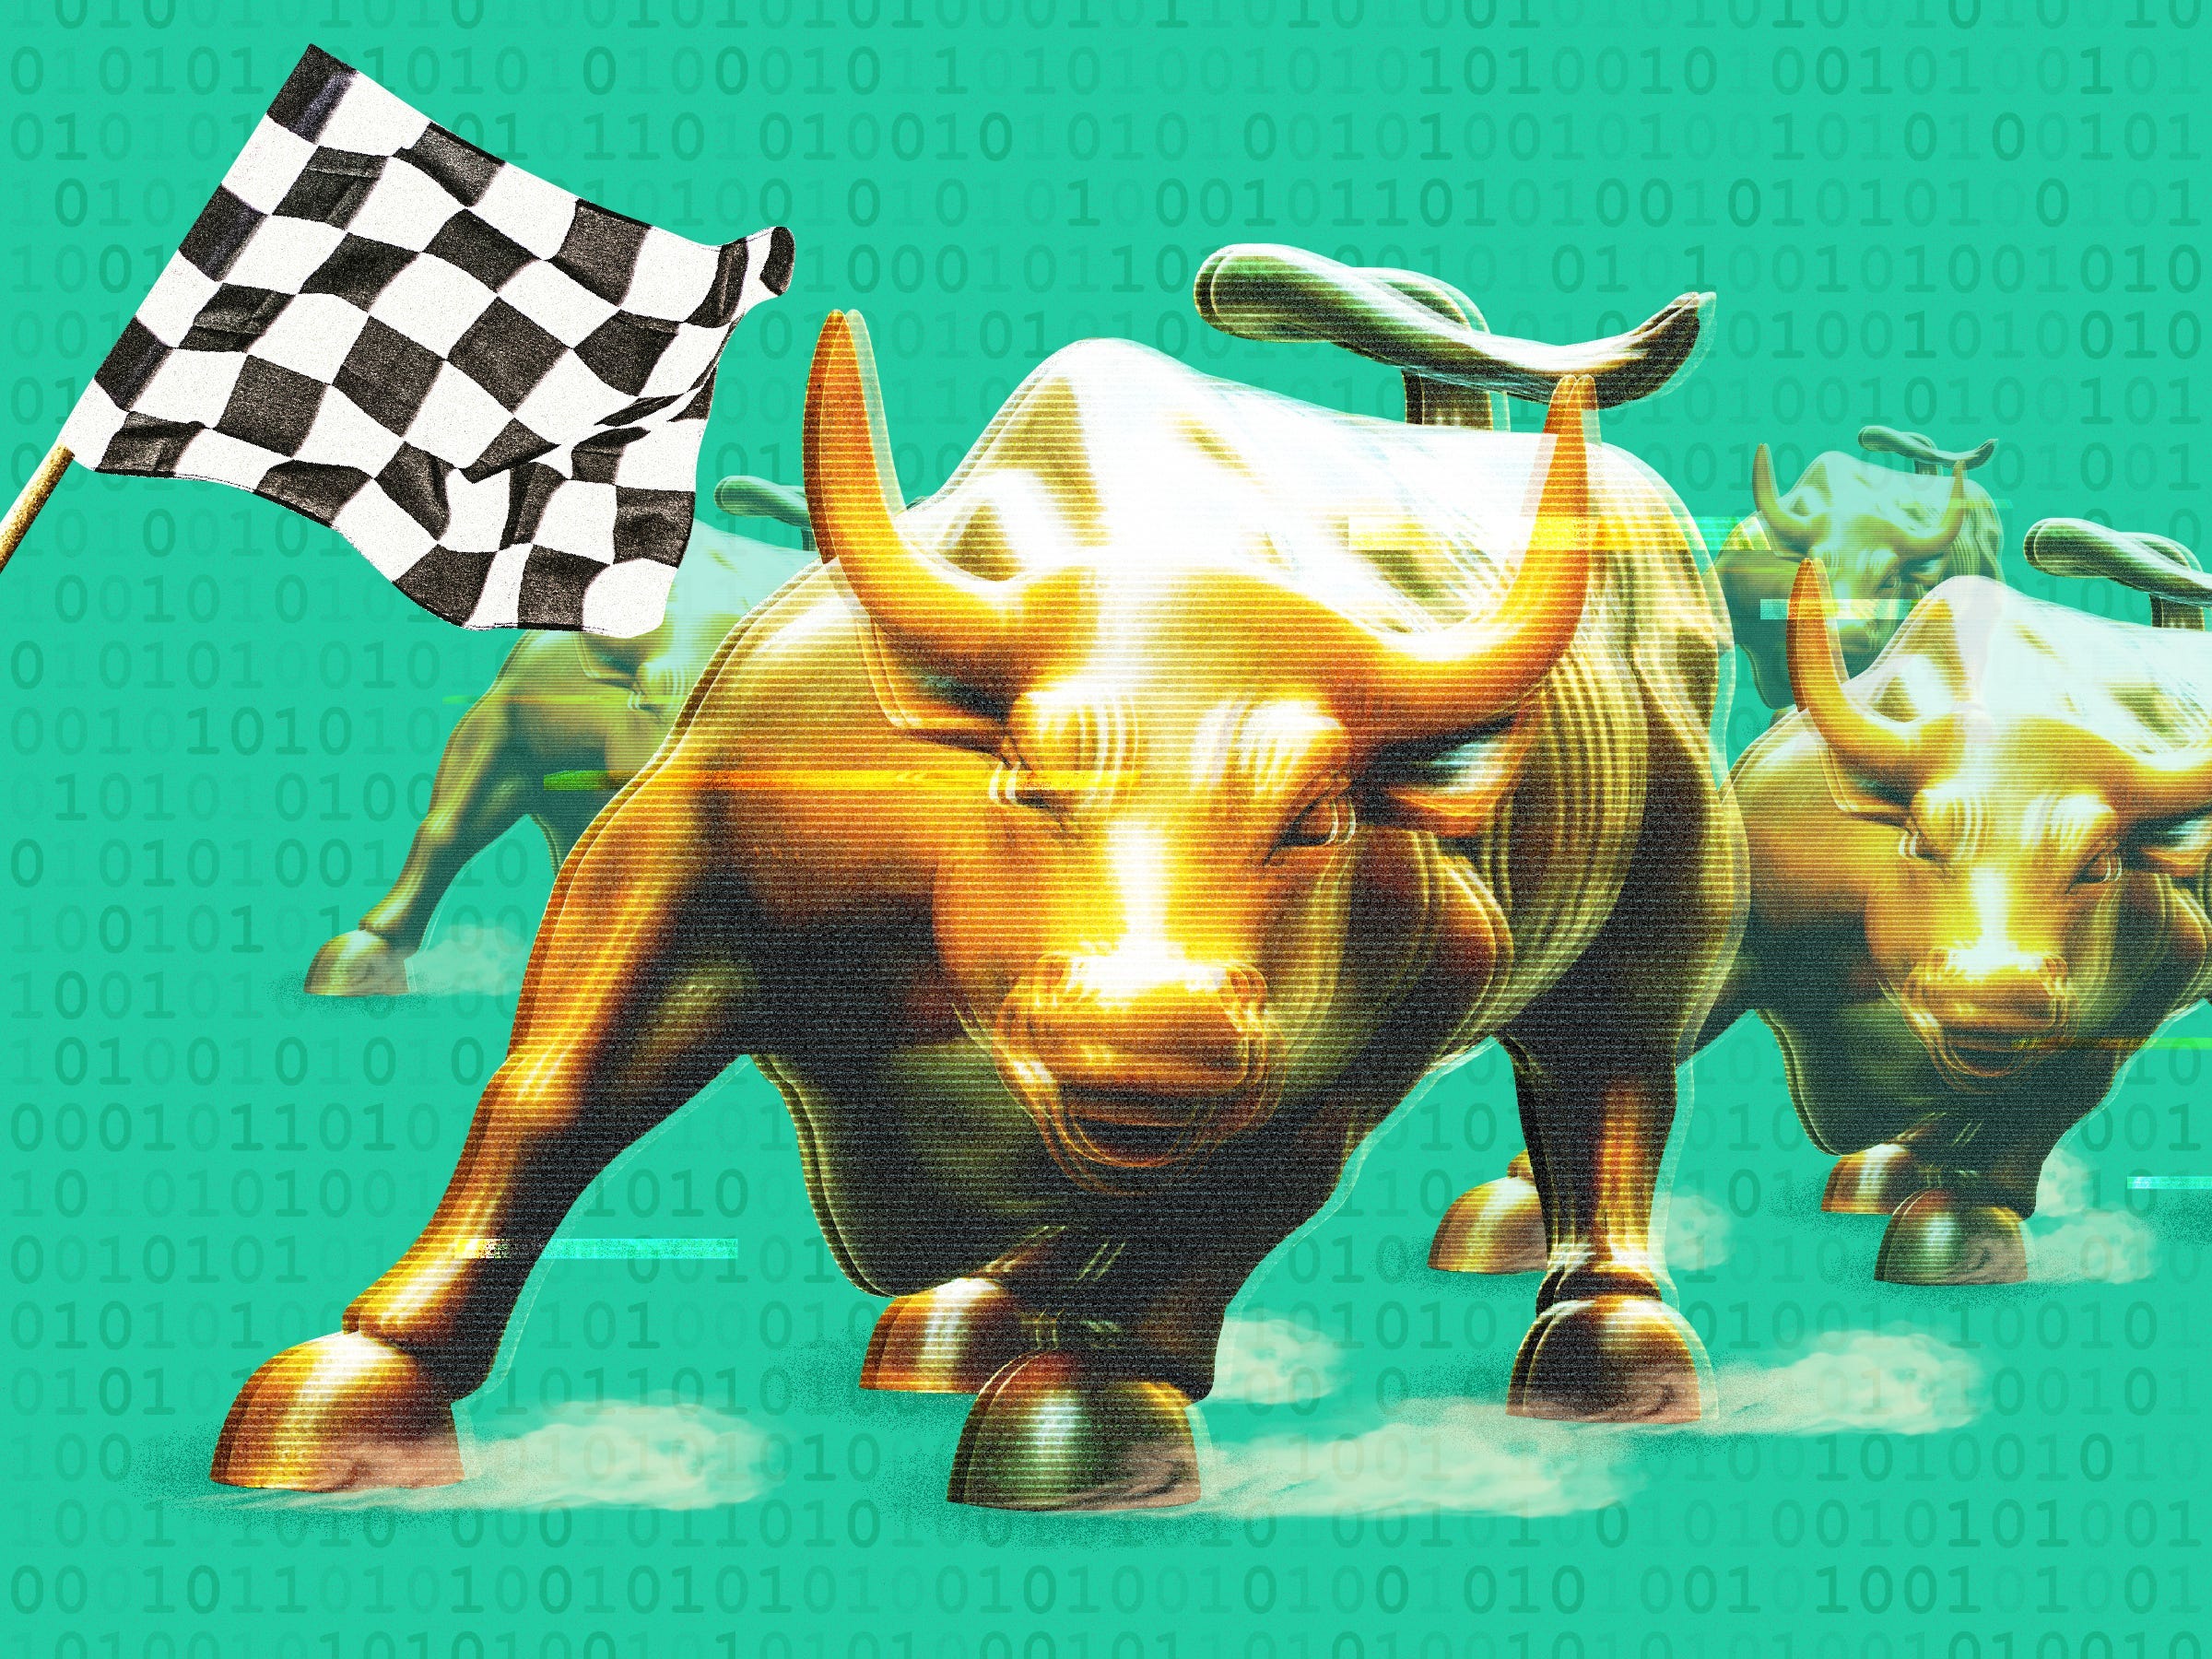 Wall Street bulls racing towards a checkered flag with binary code on a green background.